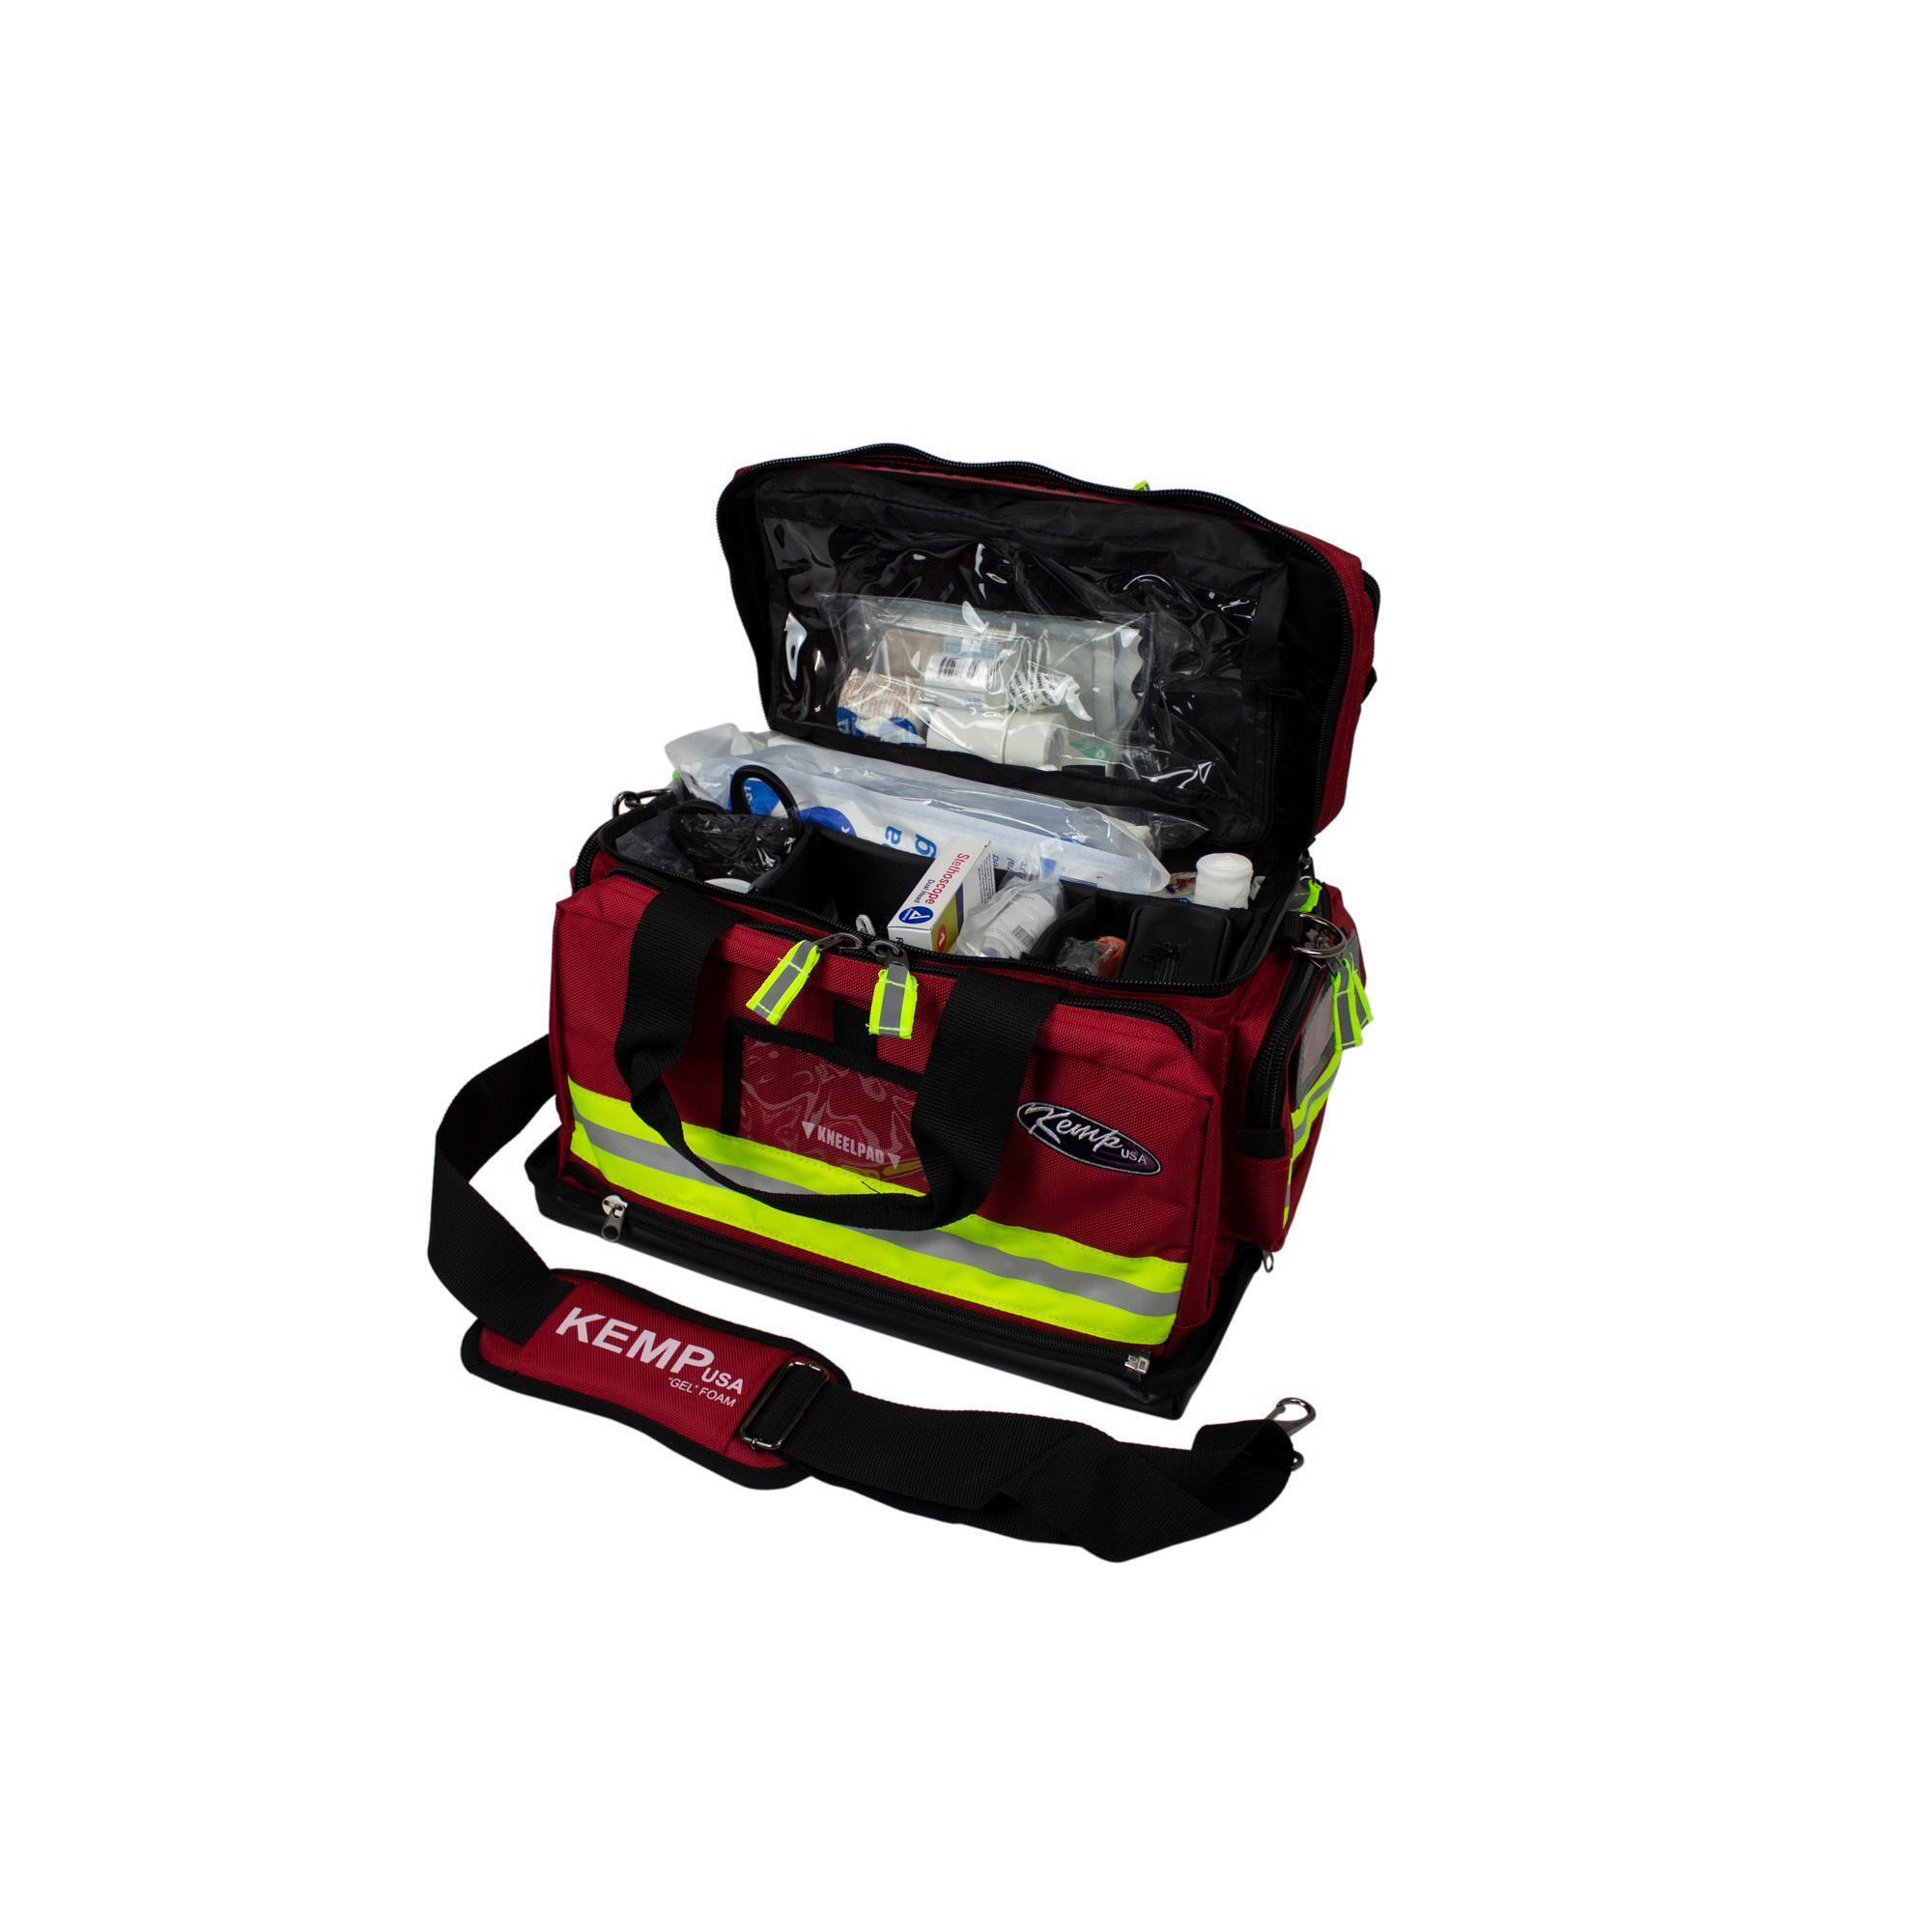 17" Red, Black, and Lime Green Outdoor Emergency Accessories Kemp USA Medical Supply Kit D alternate image